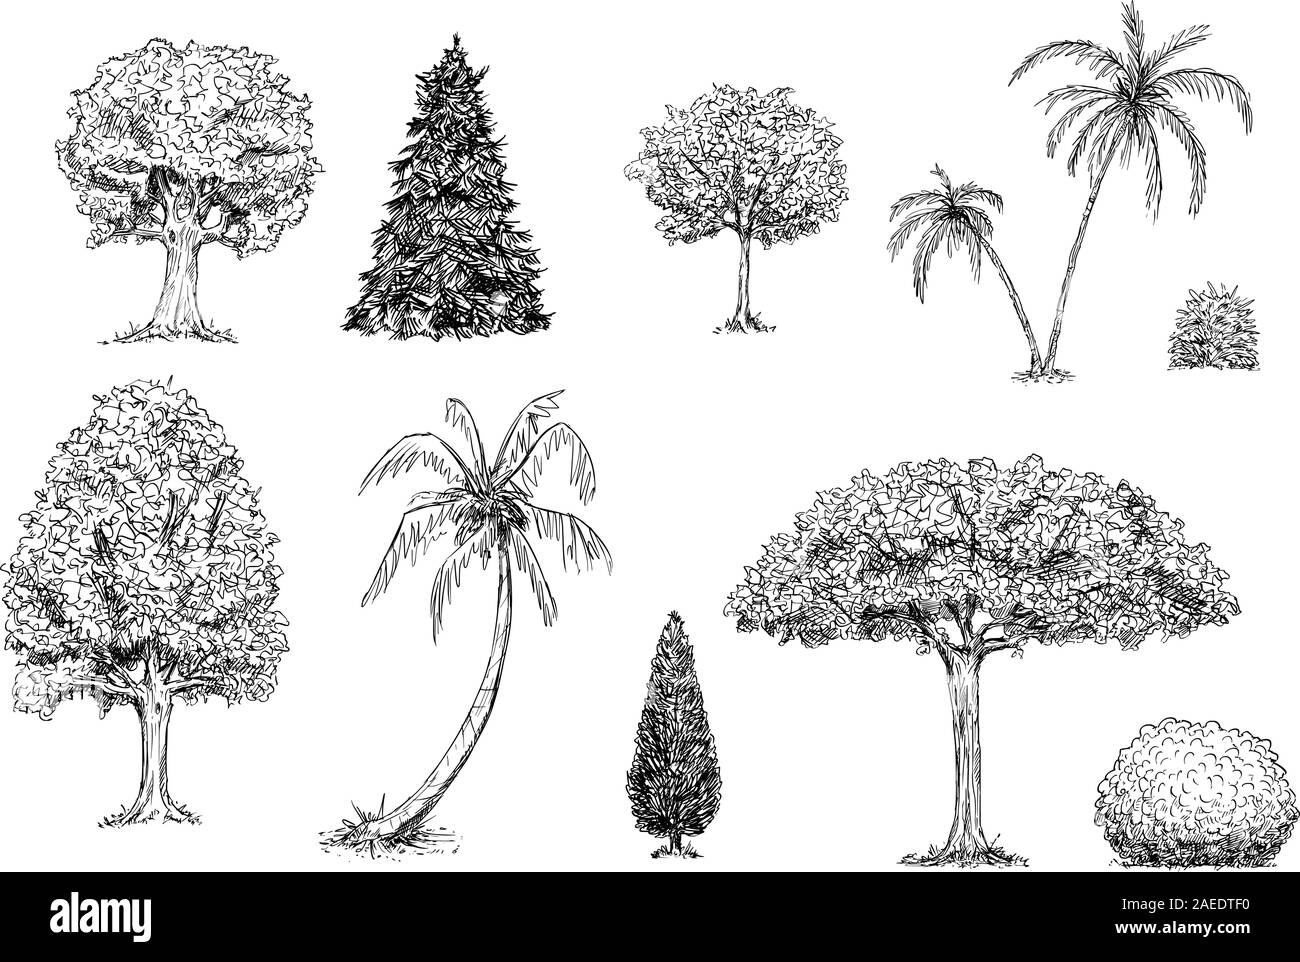 Vector hand drawn black and white illustration of set of trees,palm trees and bushes. Images of plants and nature. Stock Vector